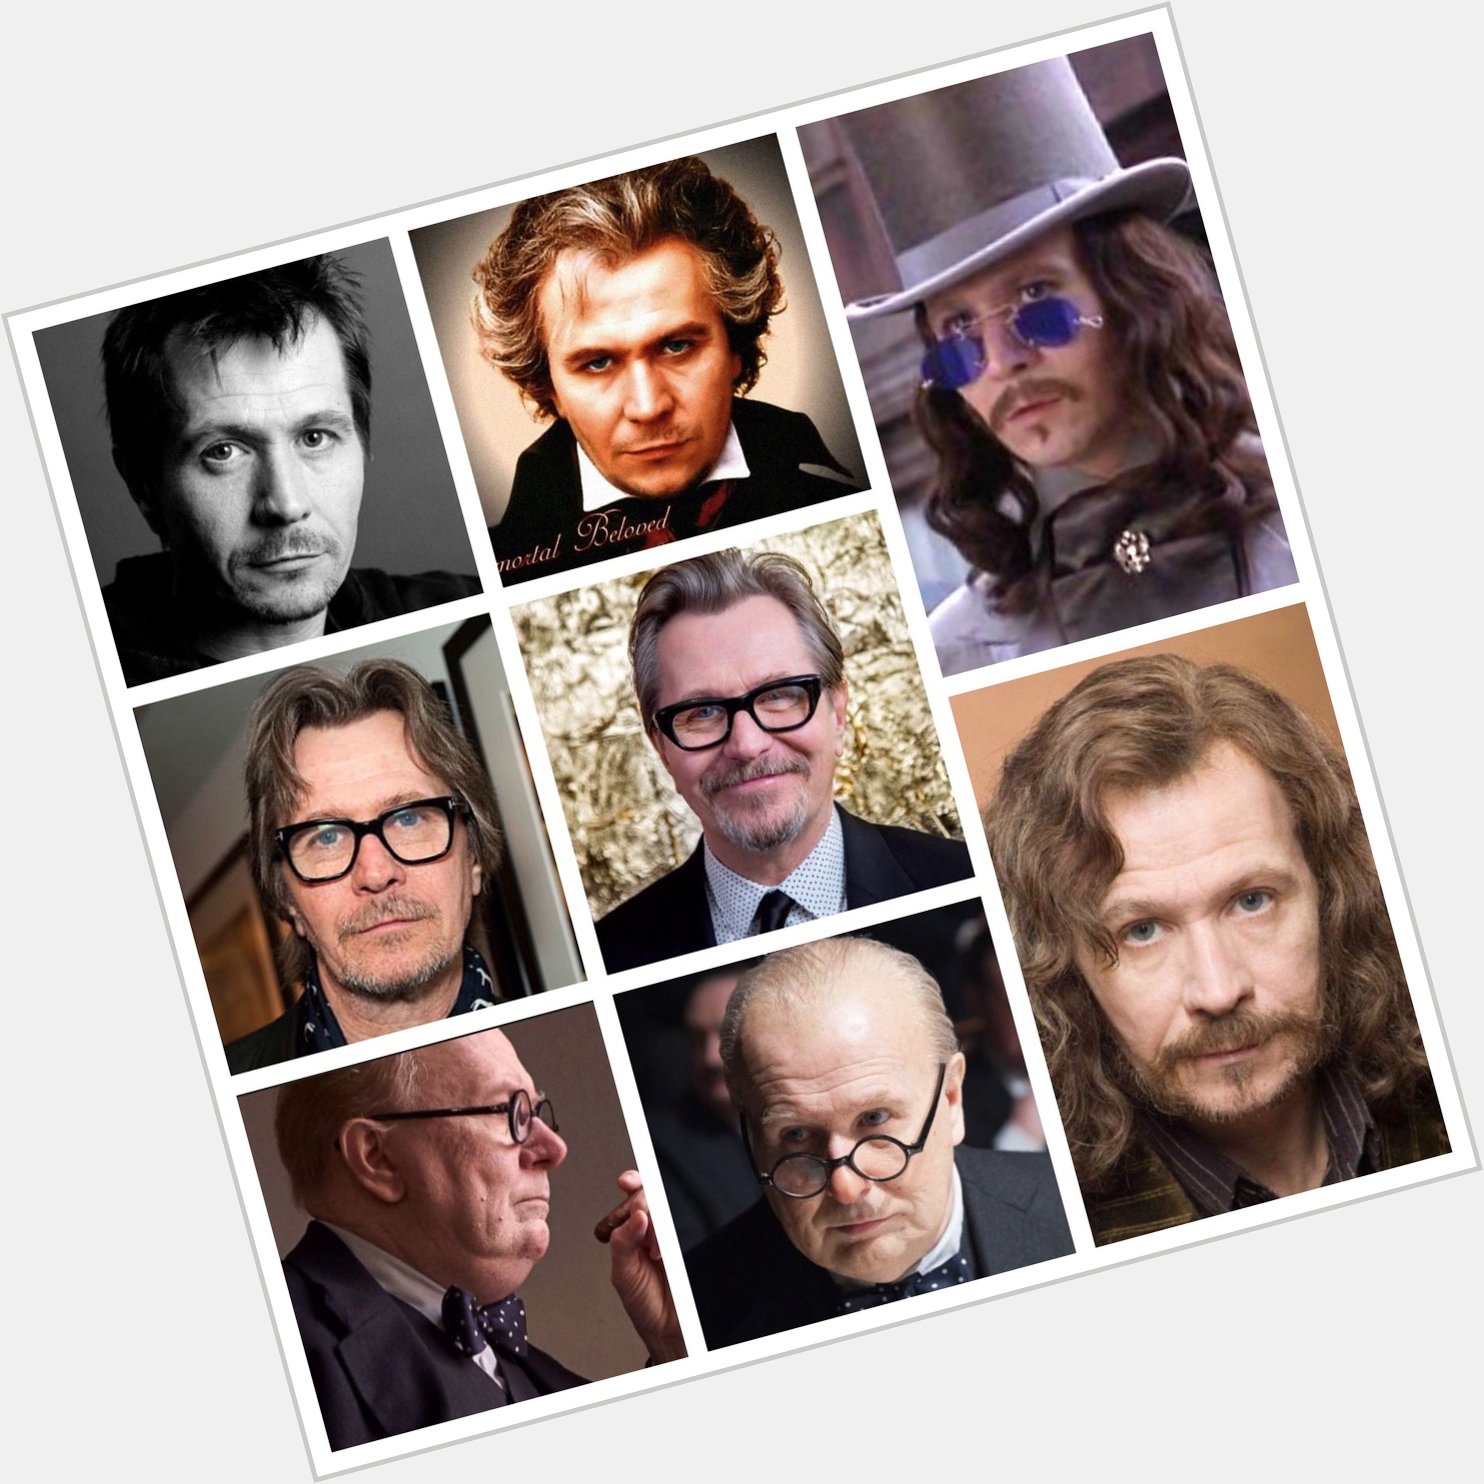 Happy 63rd birthday to Gary Oldman, one of the greatest actors working today. 